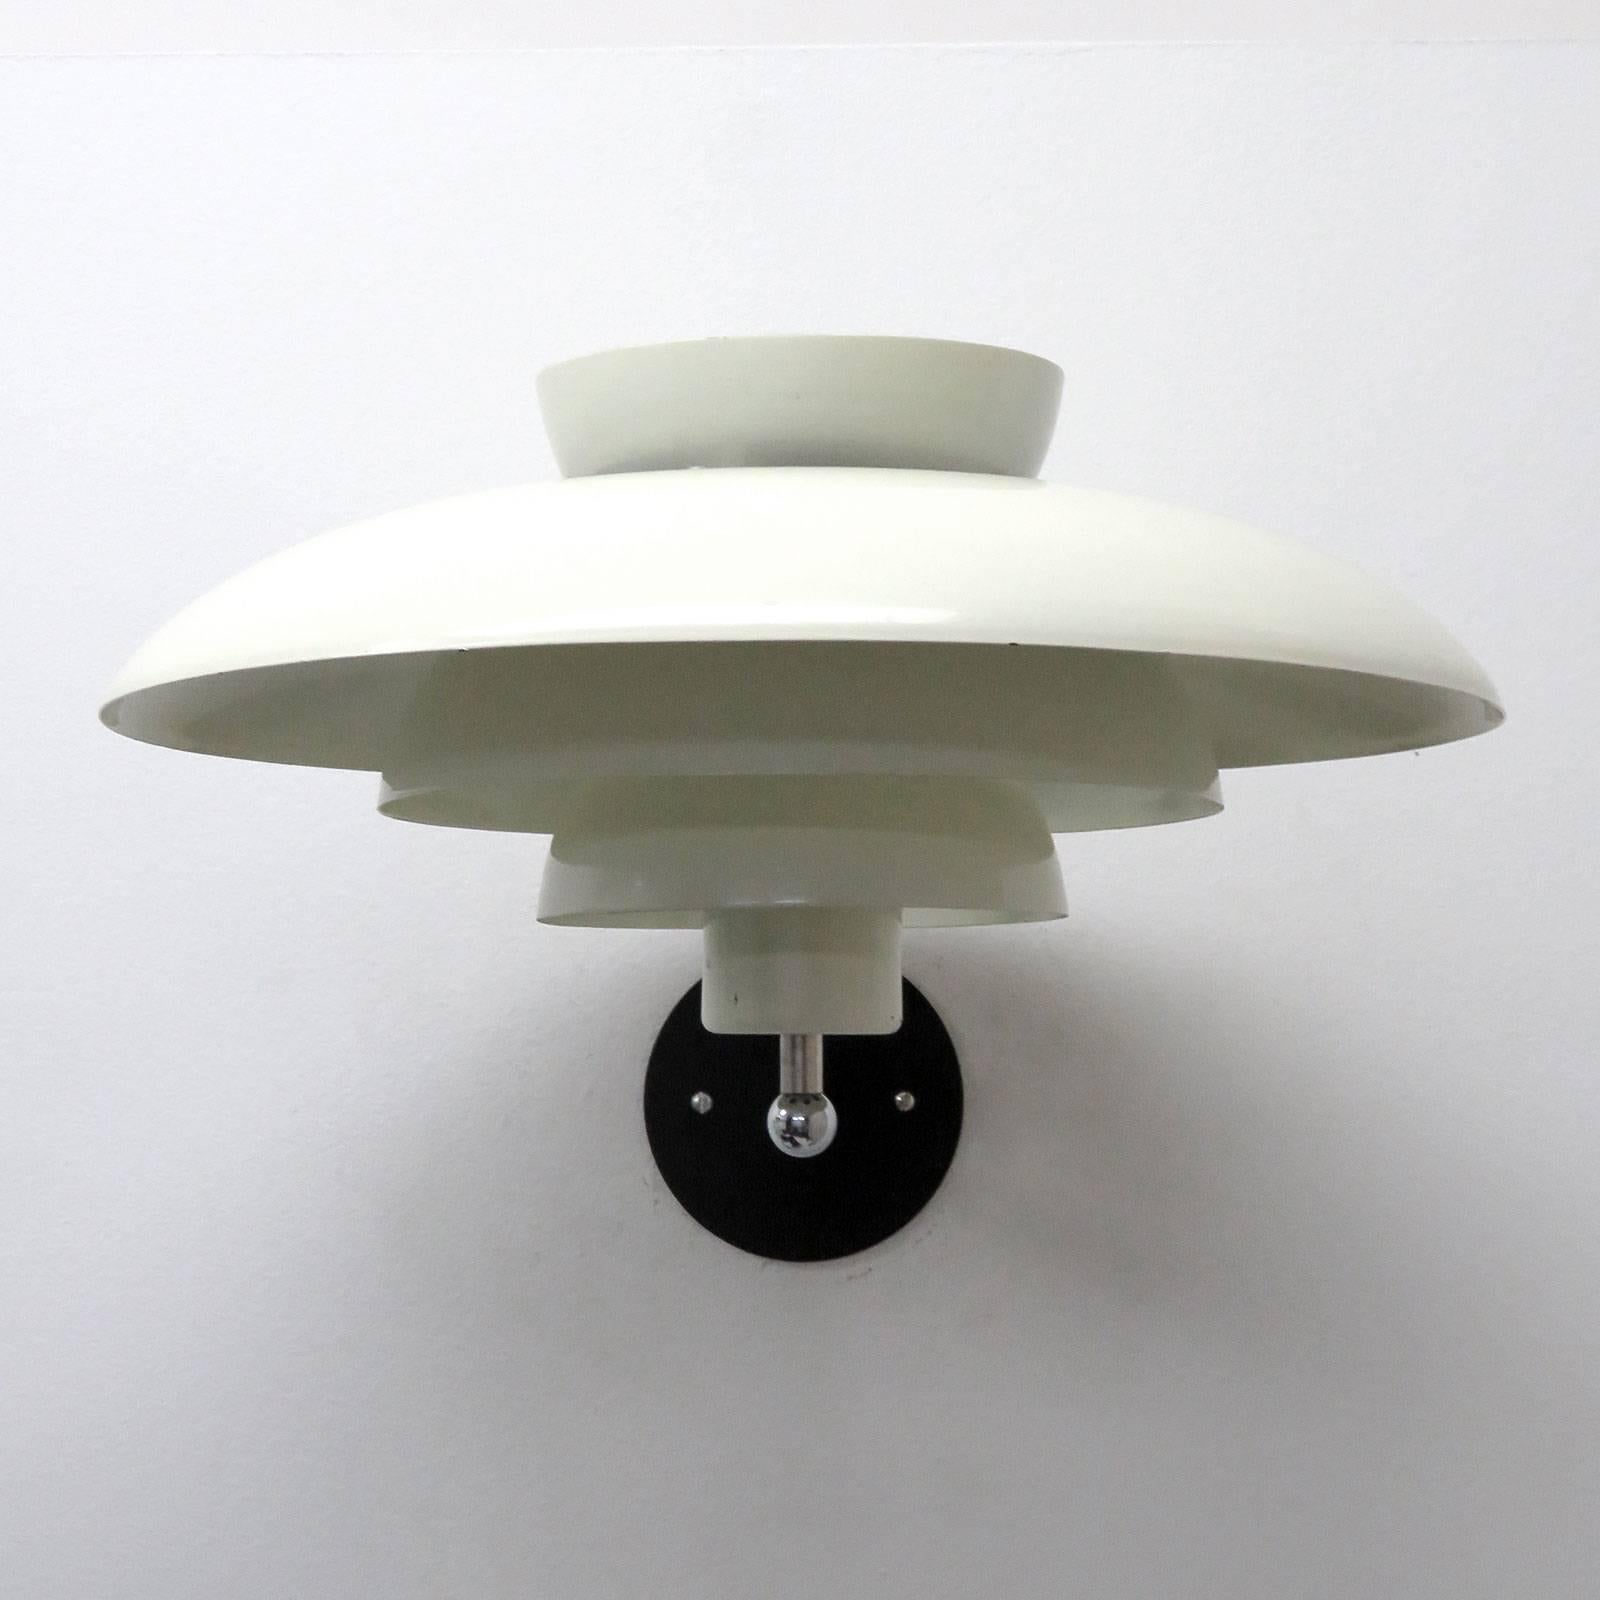 Wonderful tiered Danish wall lights by Horn with white enameled metal rings of different sizes perched on a minimal chrome arm, can be mounted upside down as well, wired for US standards, one E27 socket per fixture, max. wattage 75w, bulbs provided